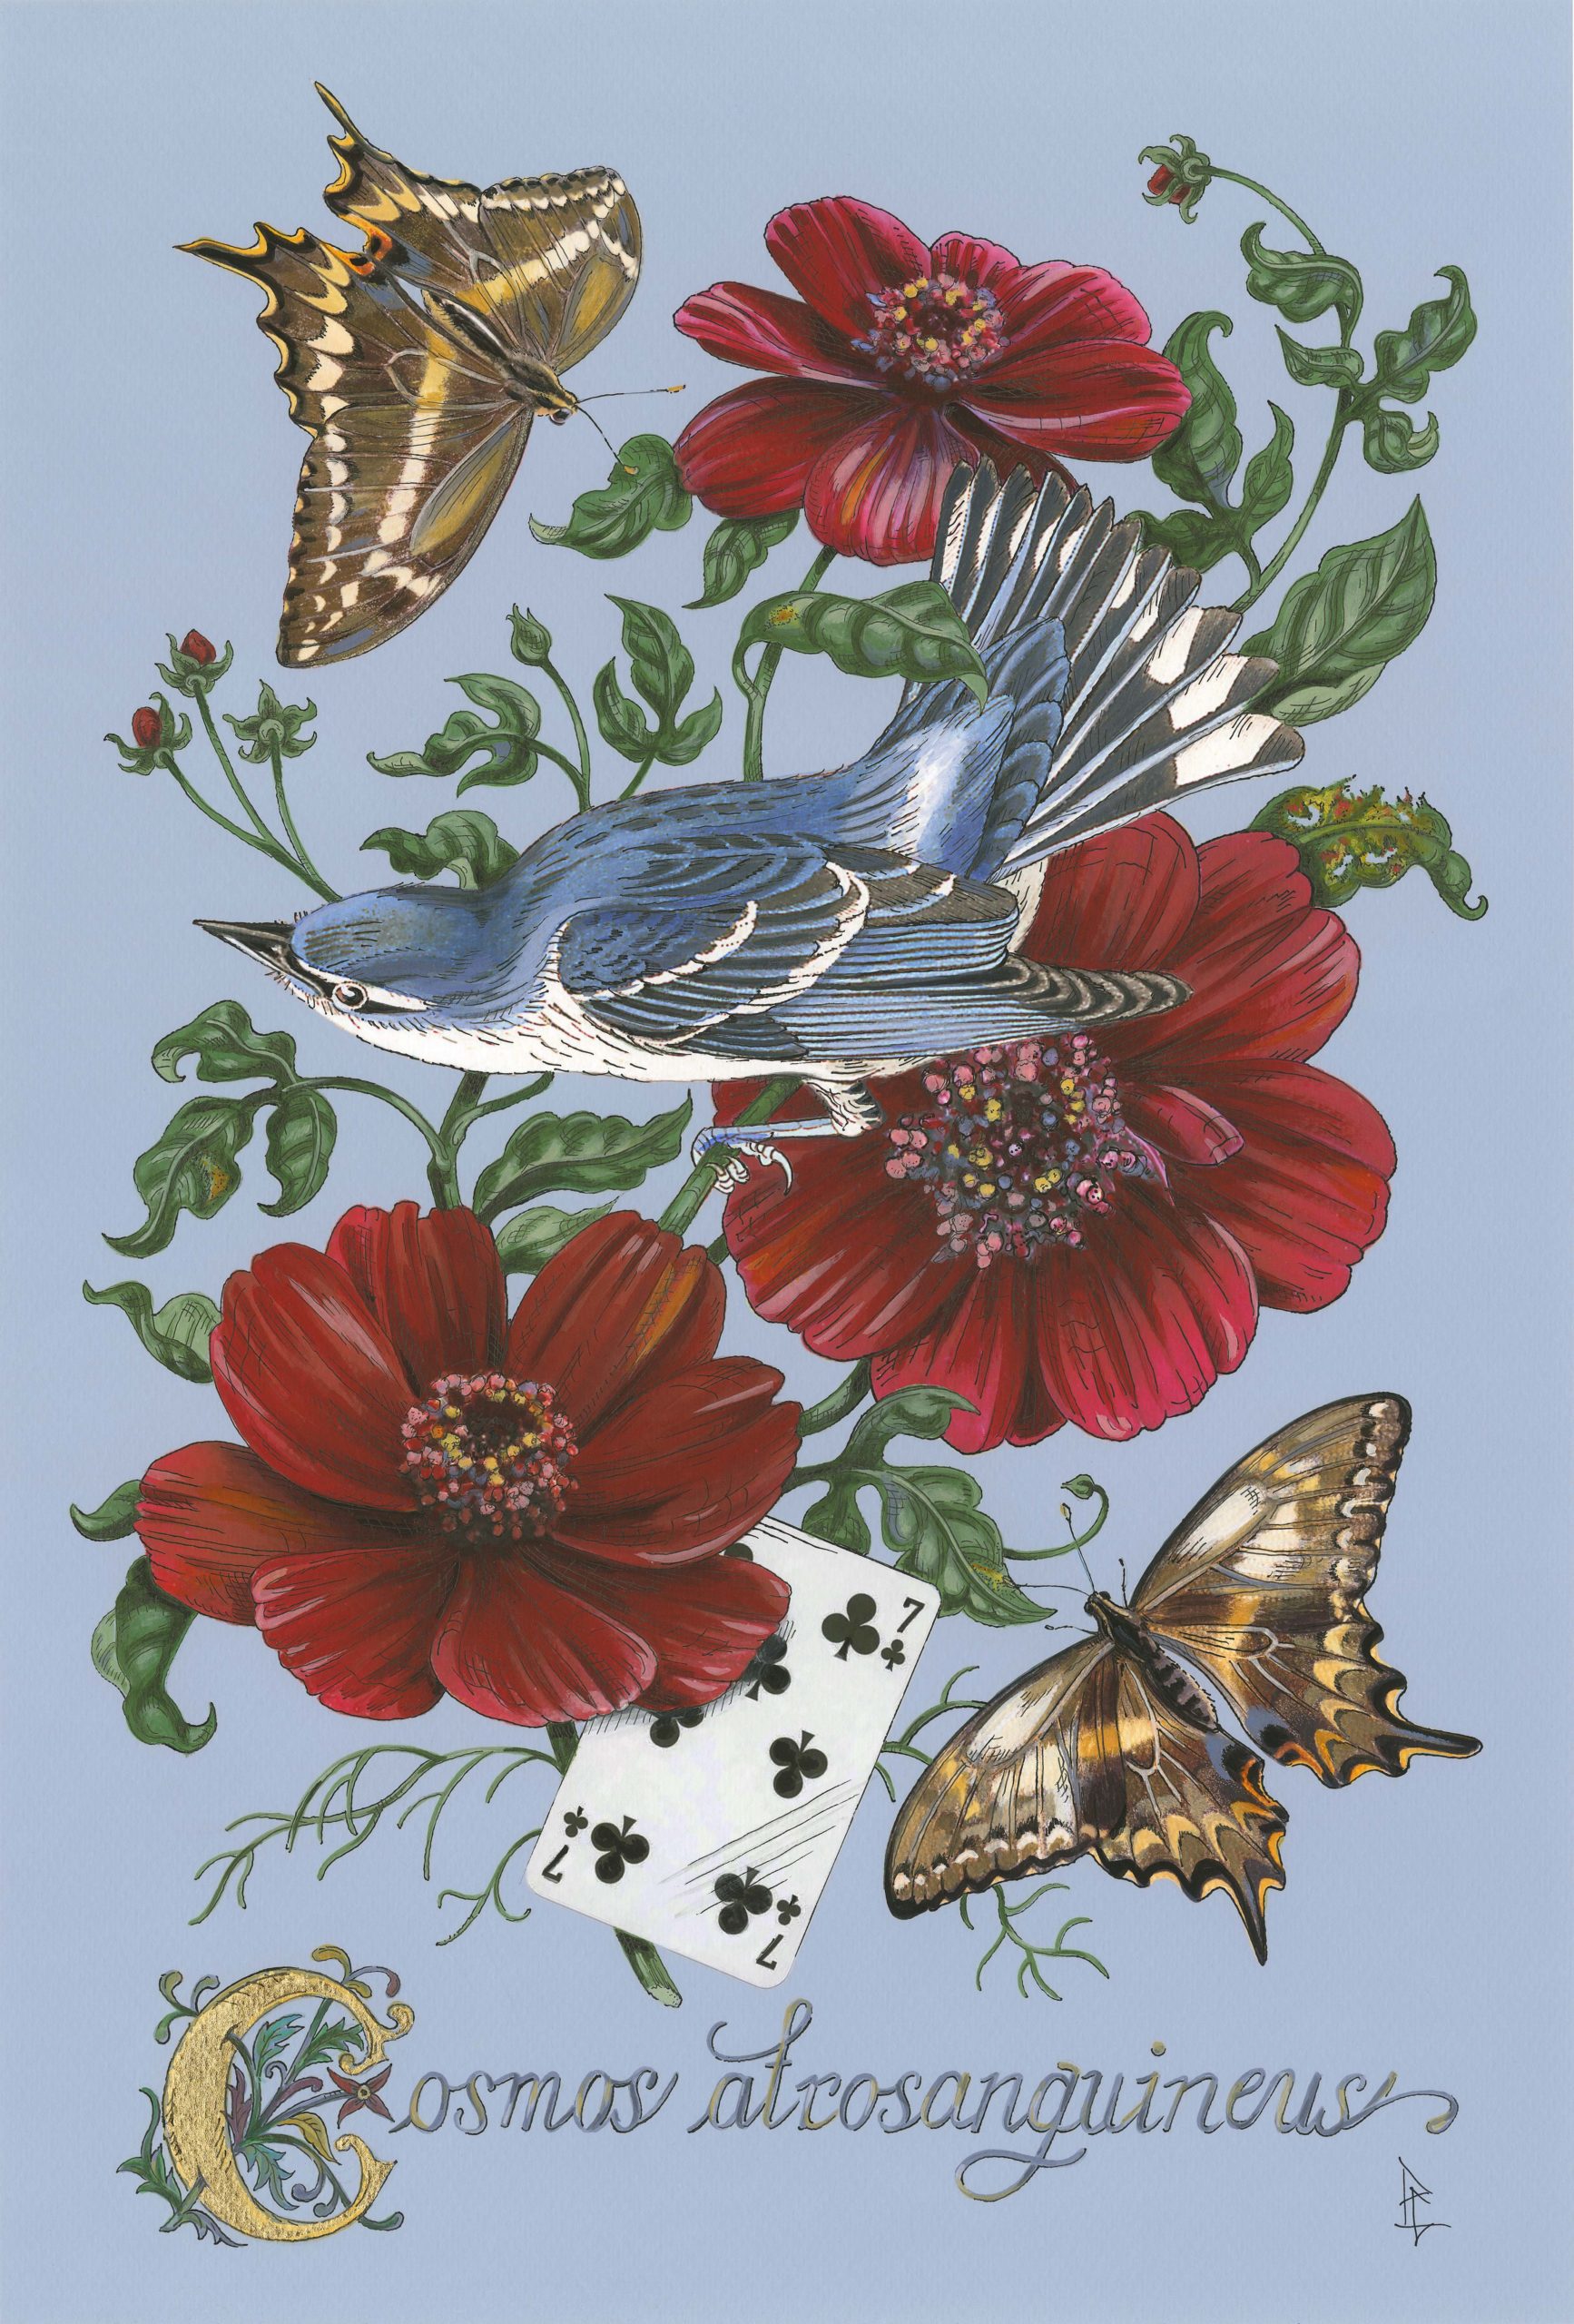 
		                					Penelope Gottlieb		                																	
																											<i>Cosmos atrosanguineus,</i>  
																																								2021, 
																																								acrylic and ink over a digital reproduction of an Audubon print, 
																																								18 x 12 inches 
																								
		                				